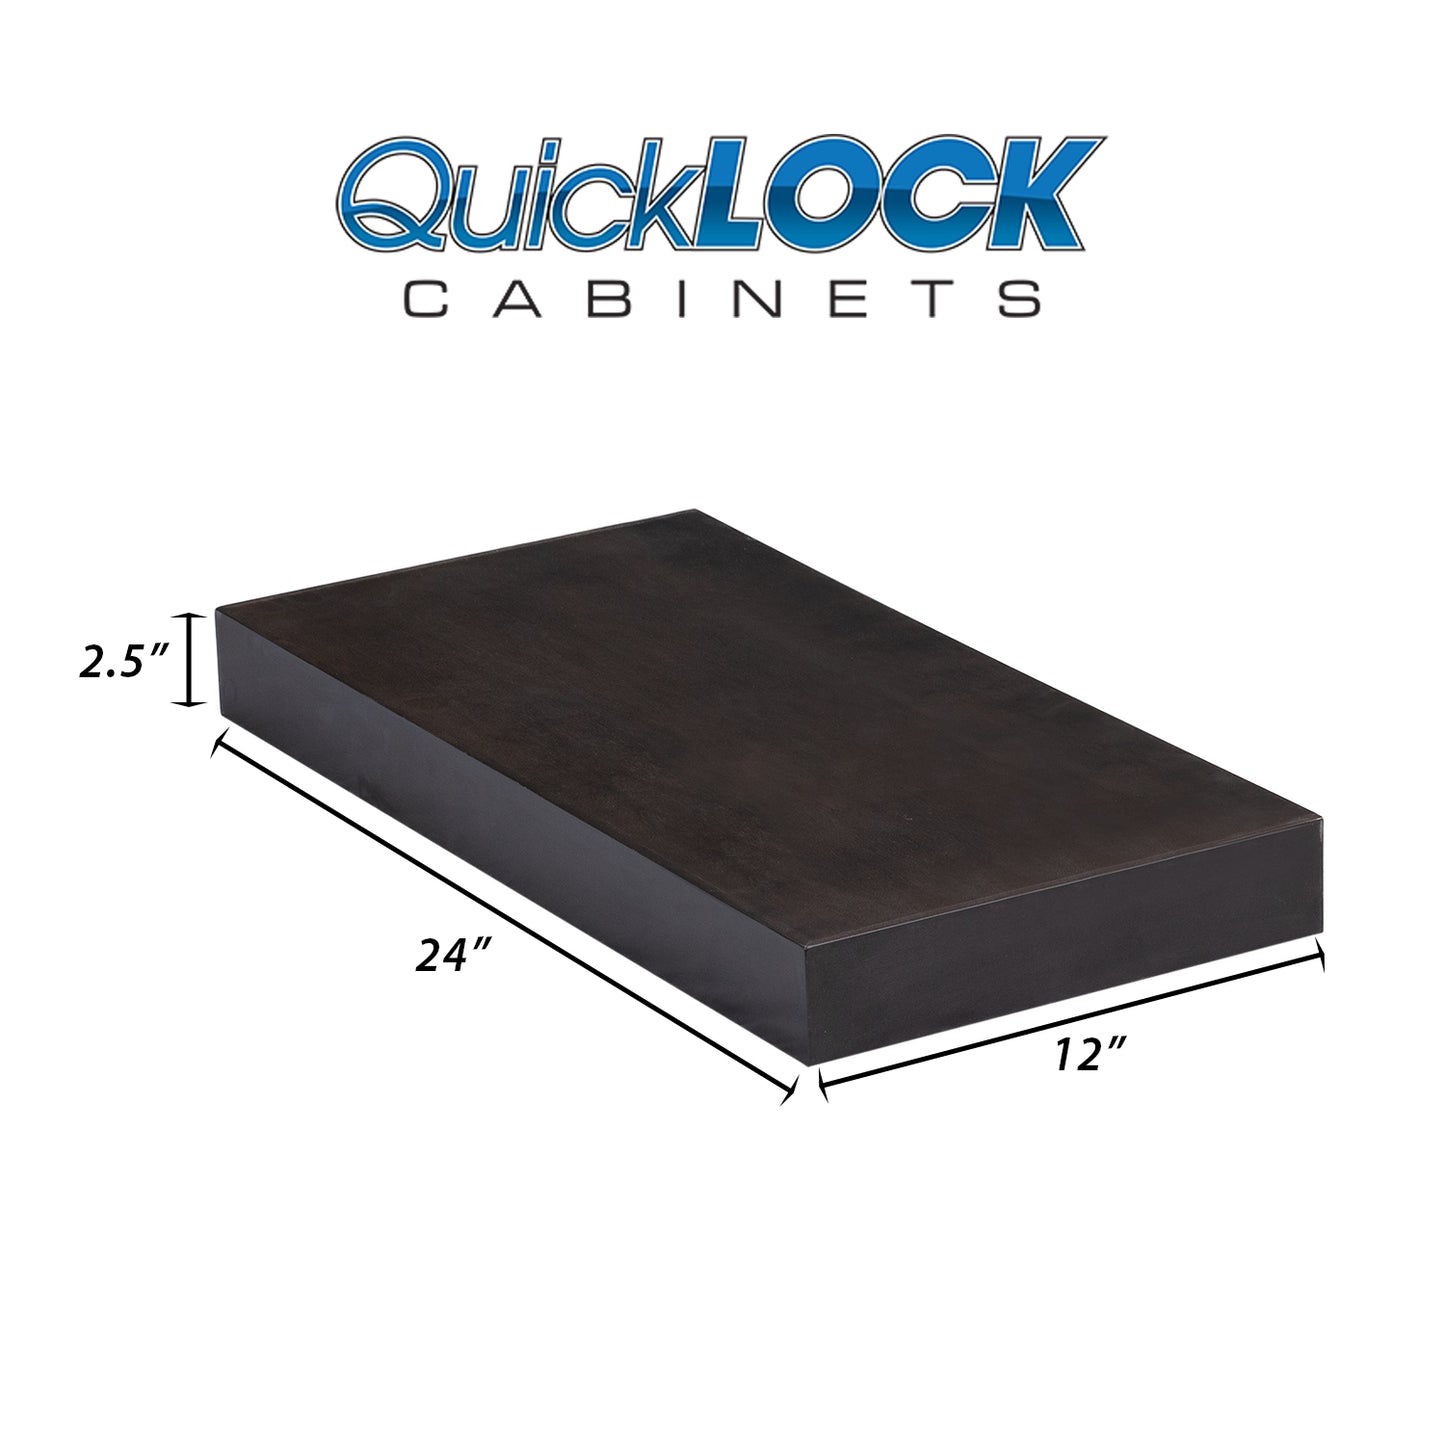 Quicklock Cabinets Floating Shelves | 2.5" Thick | Espresso Stain, 12" D x 24" W x 2.5" H | American Made | Hardwood Bracket | Complete Shelf Unit